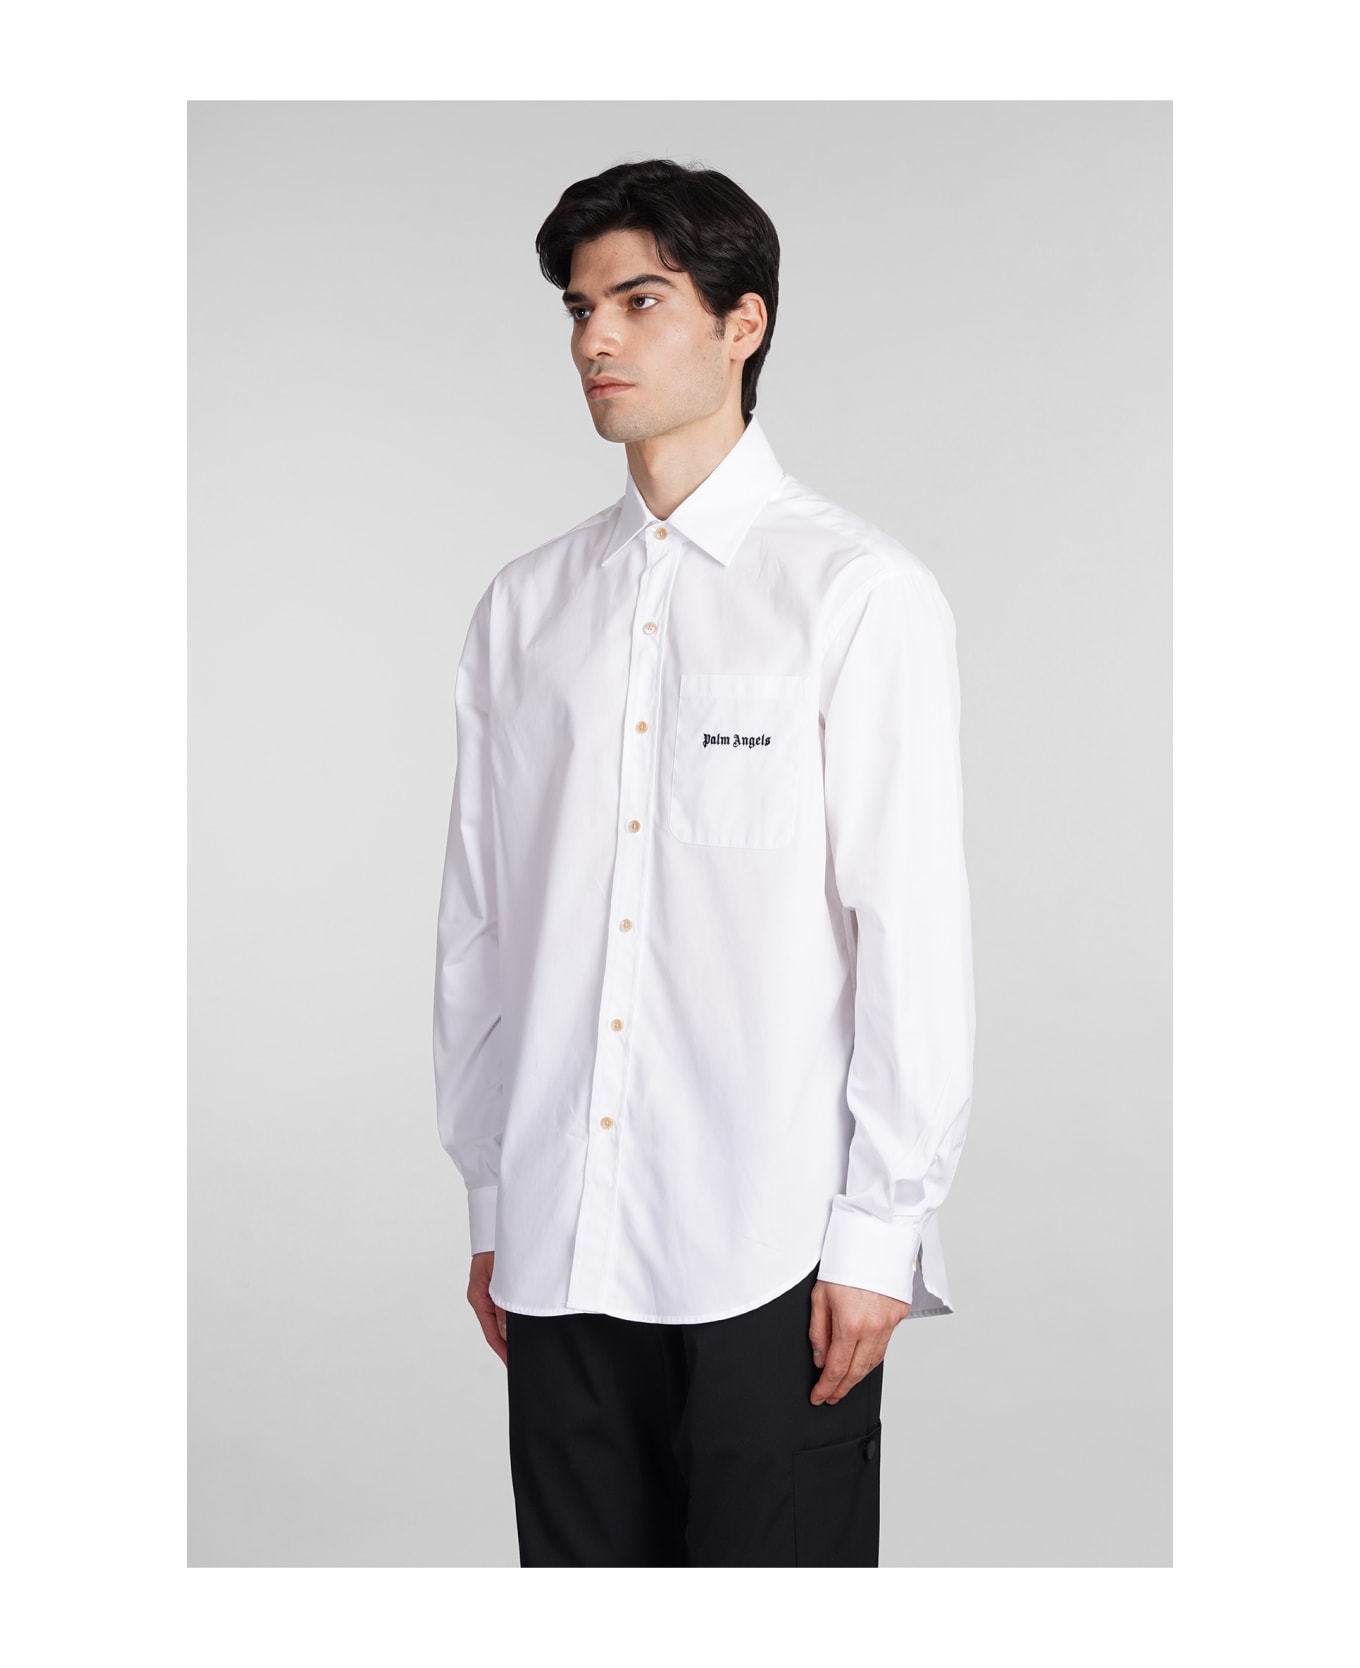 Palm Angels Shirt In White Cotton - white